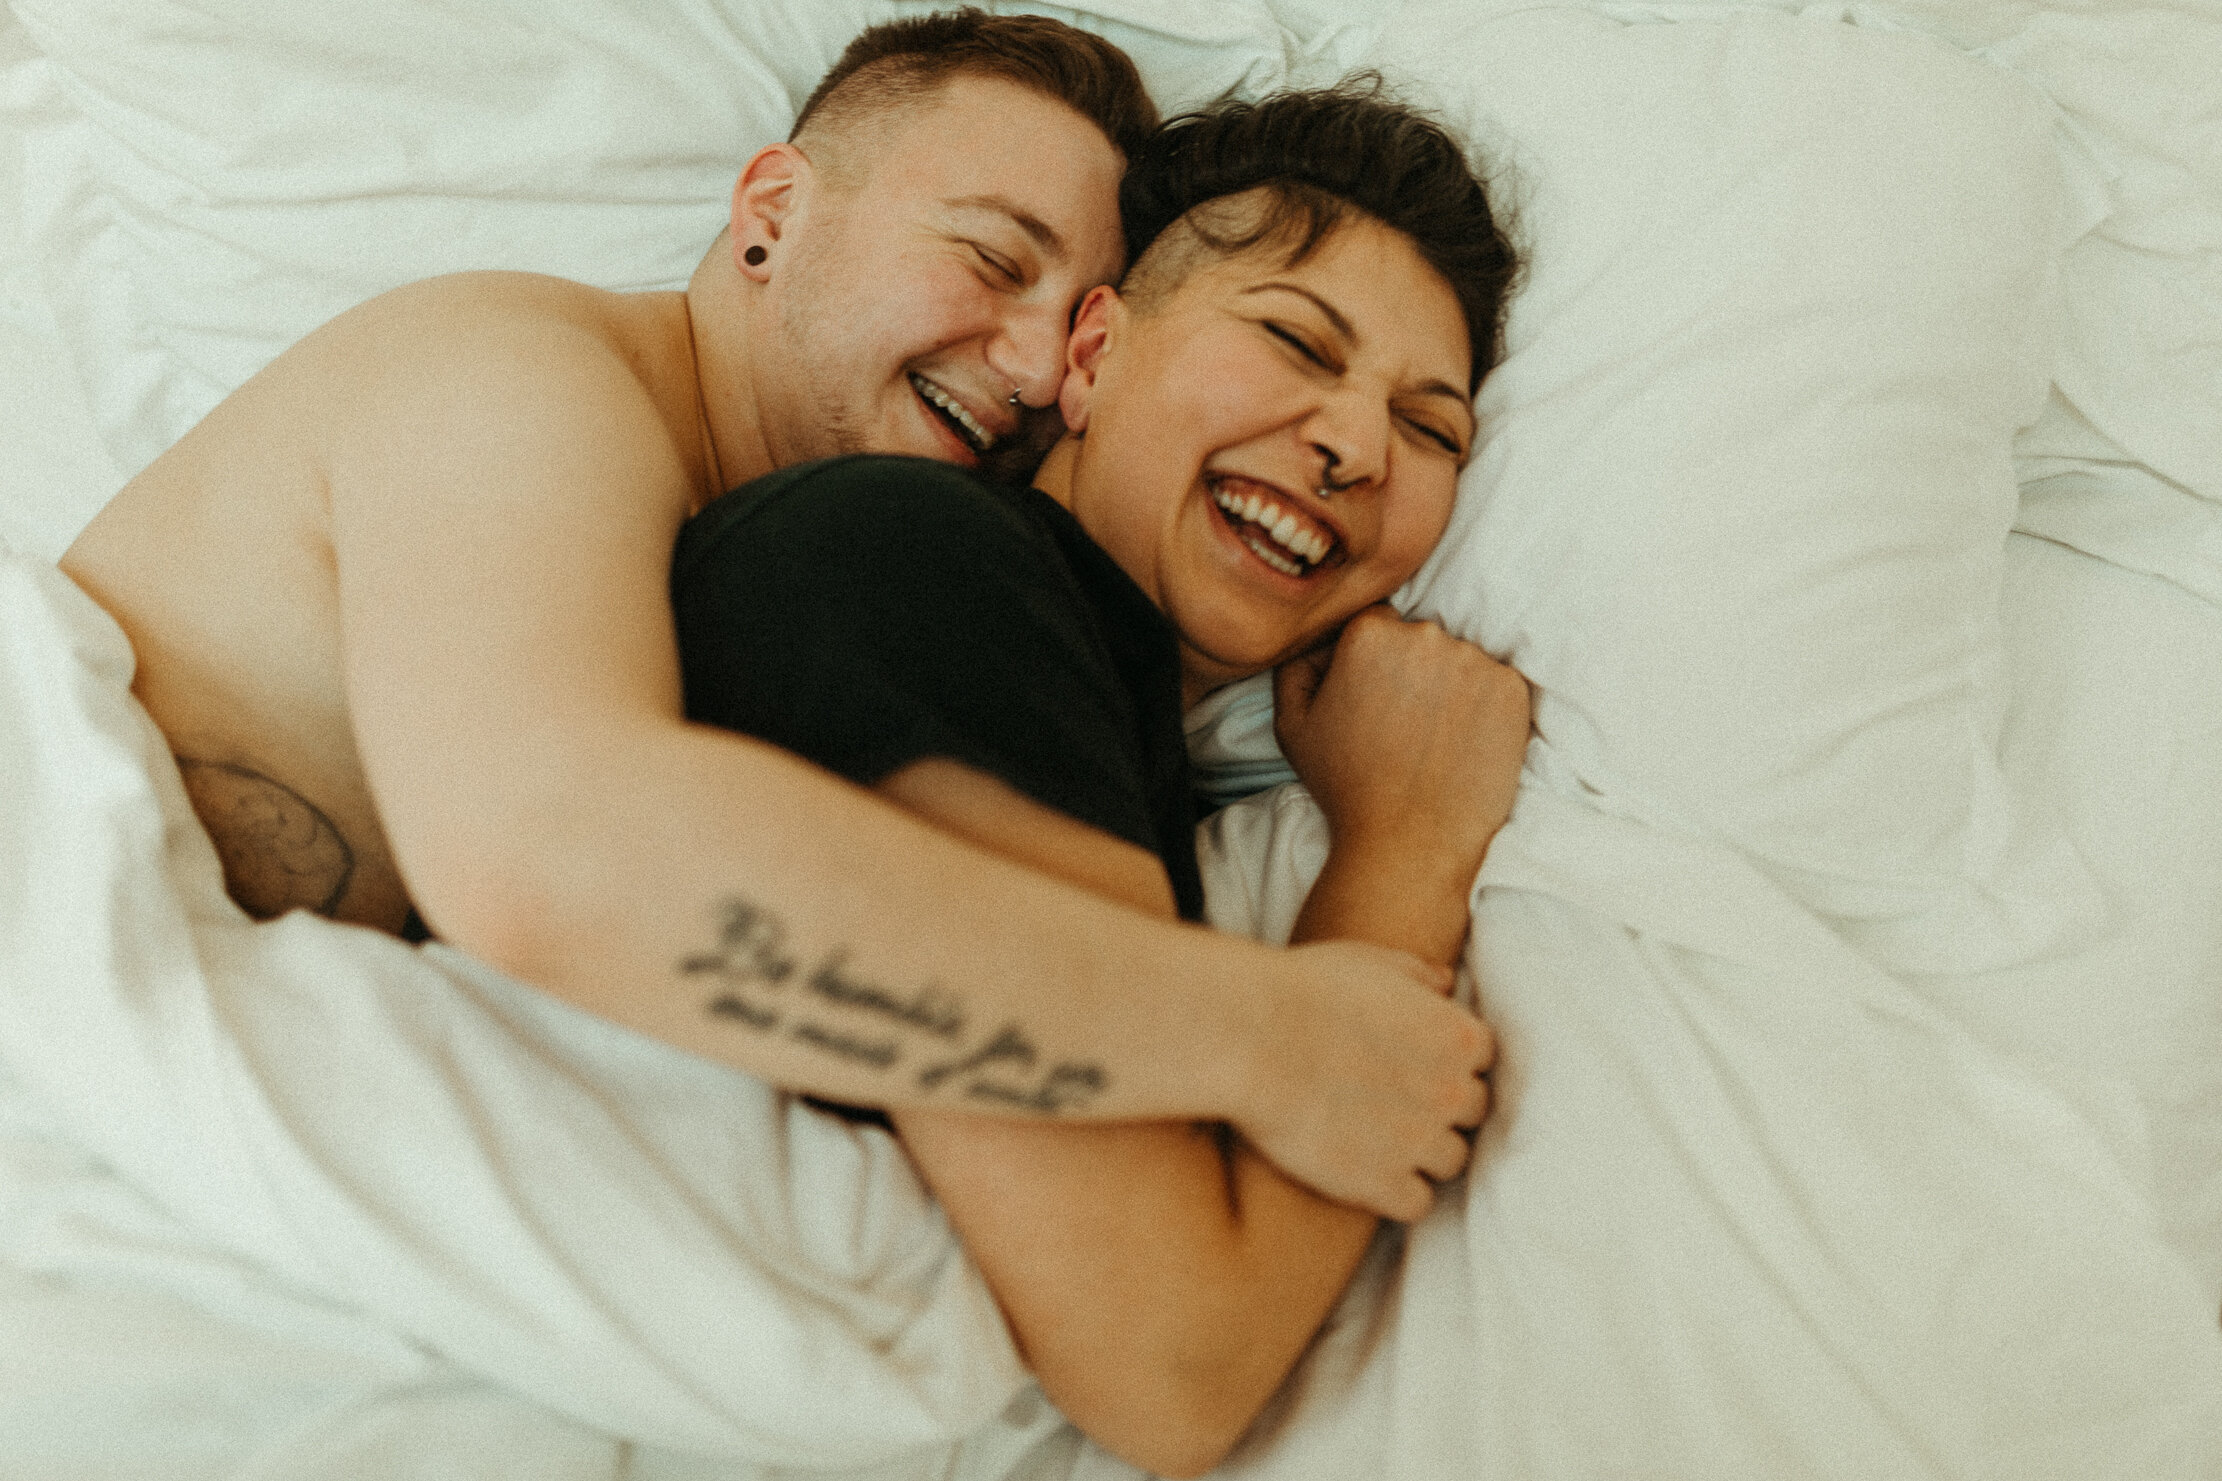 seattle-portland-tacoma-queer-trans-non-binary-intimate-in-home-pnw-engaygement-engagement-couples-boudoir-photographer-halle-roland-photography-393.jpg